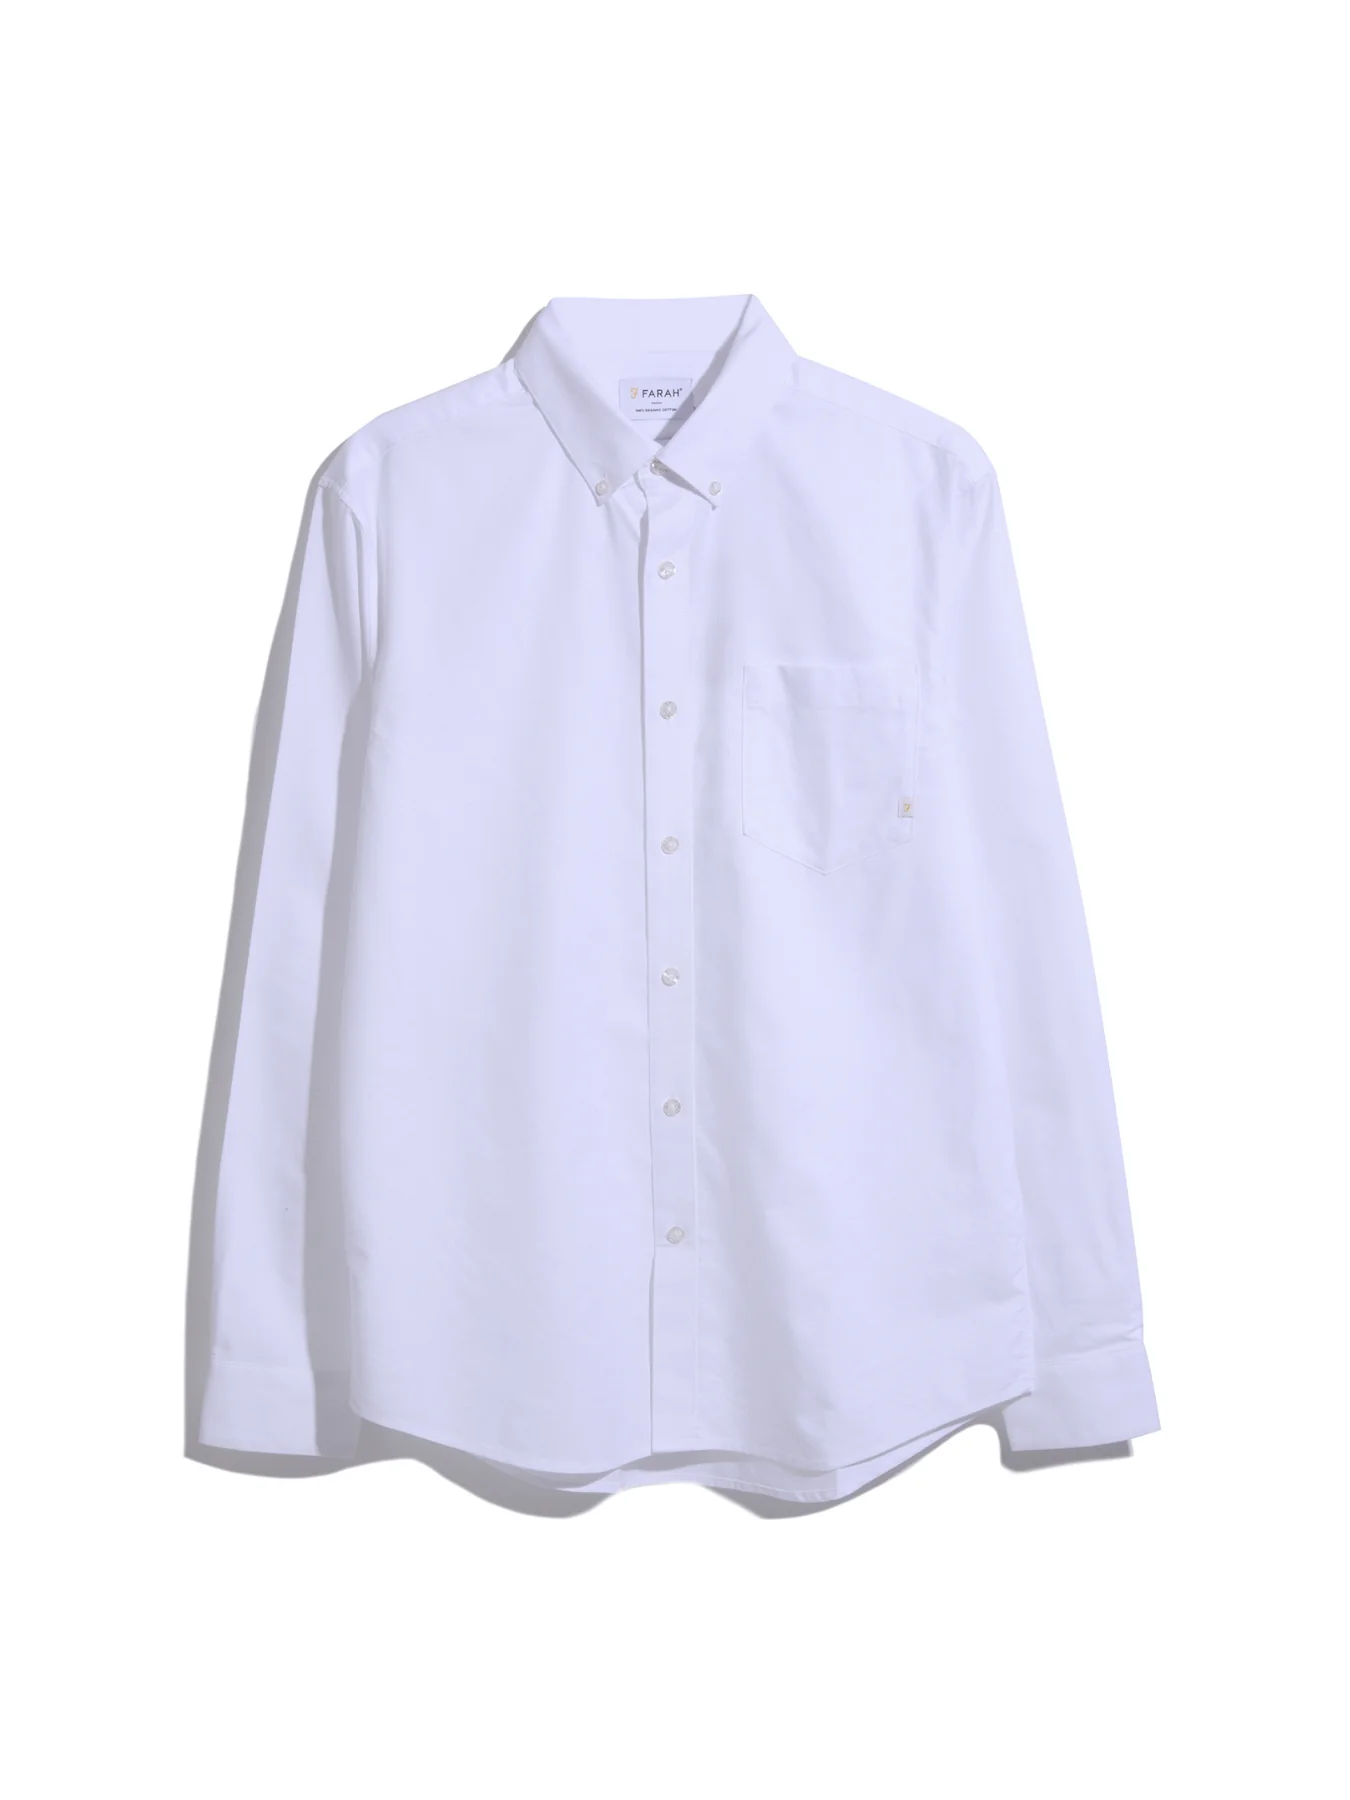 Farah Brewer Casual Fit Organic Cotton Long Sleeve Shirt In White 